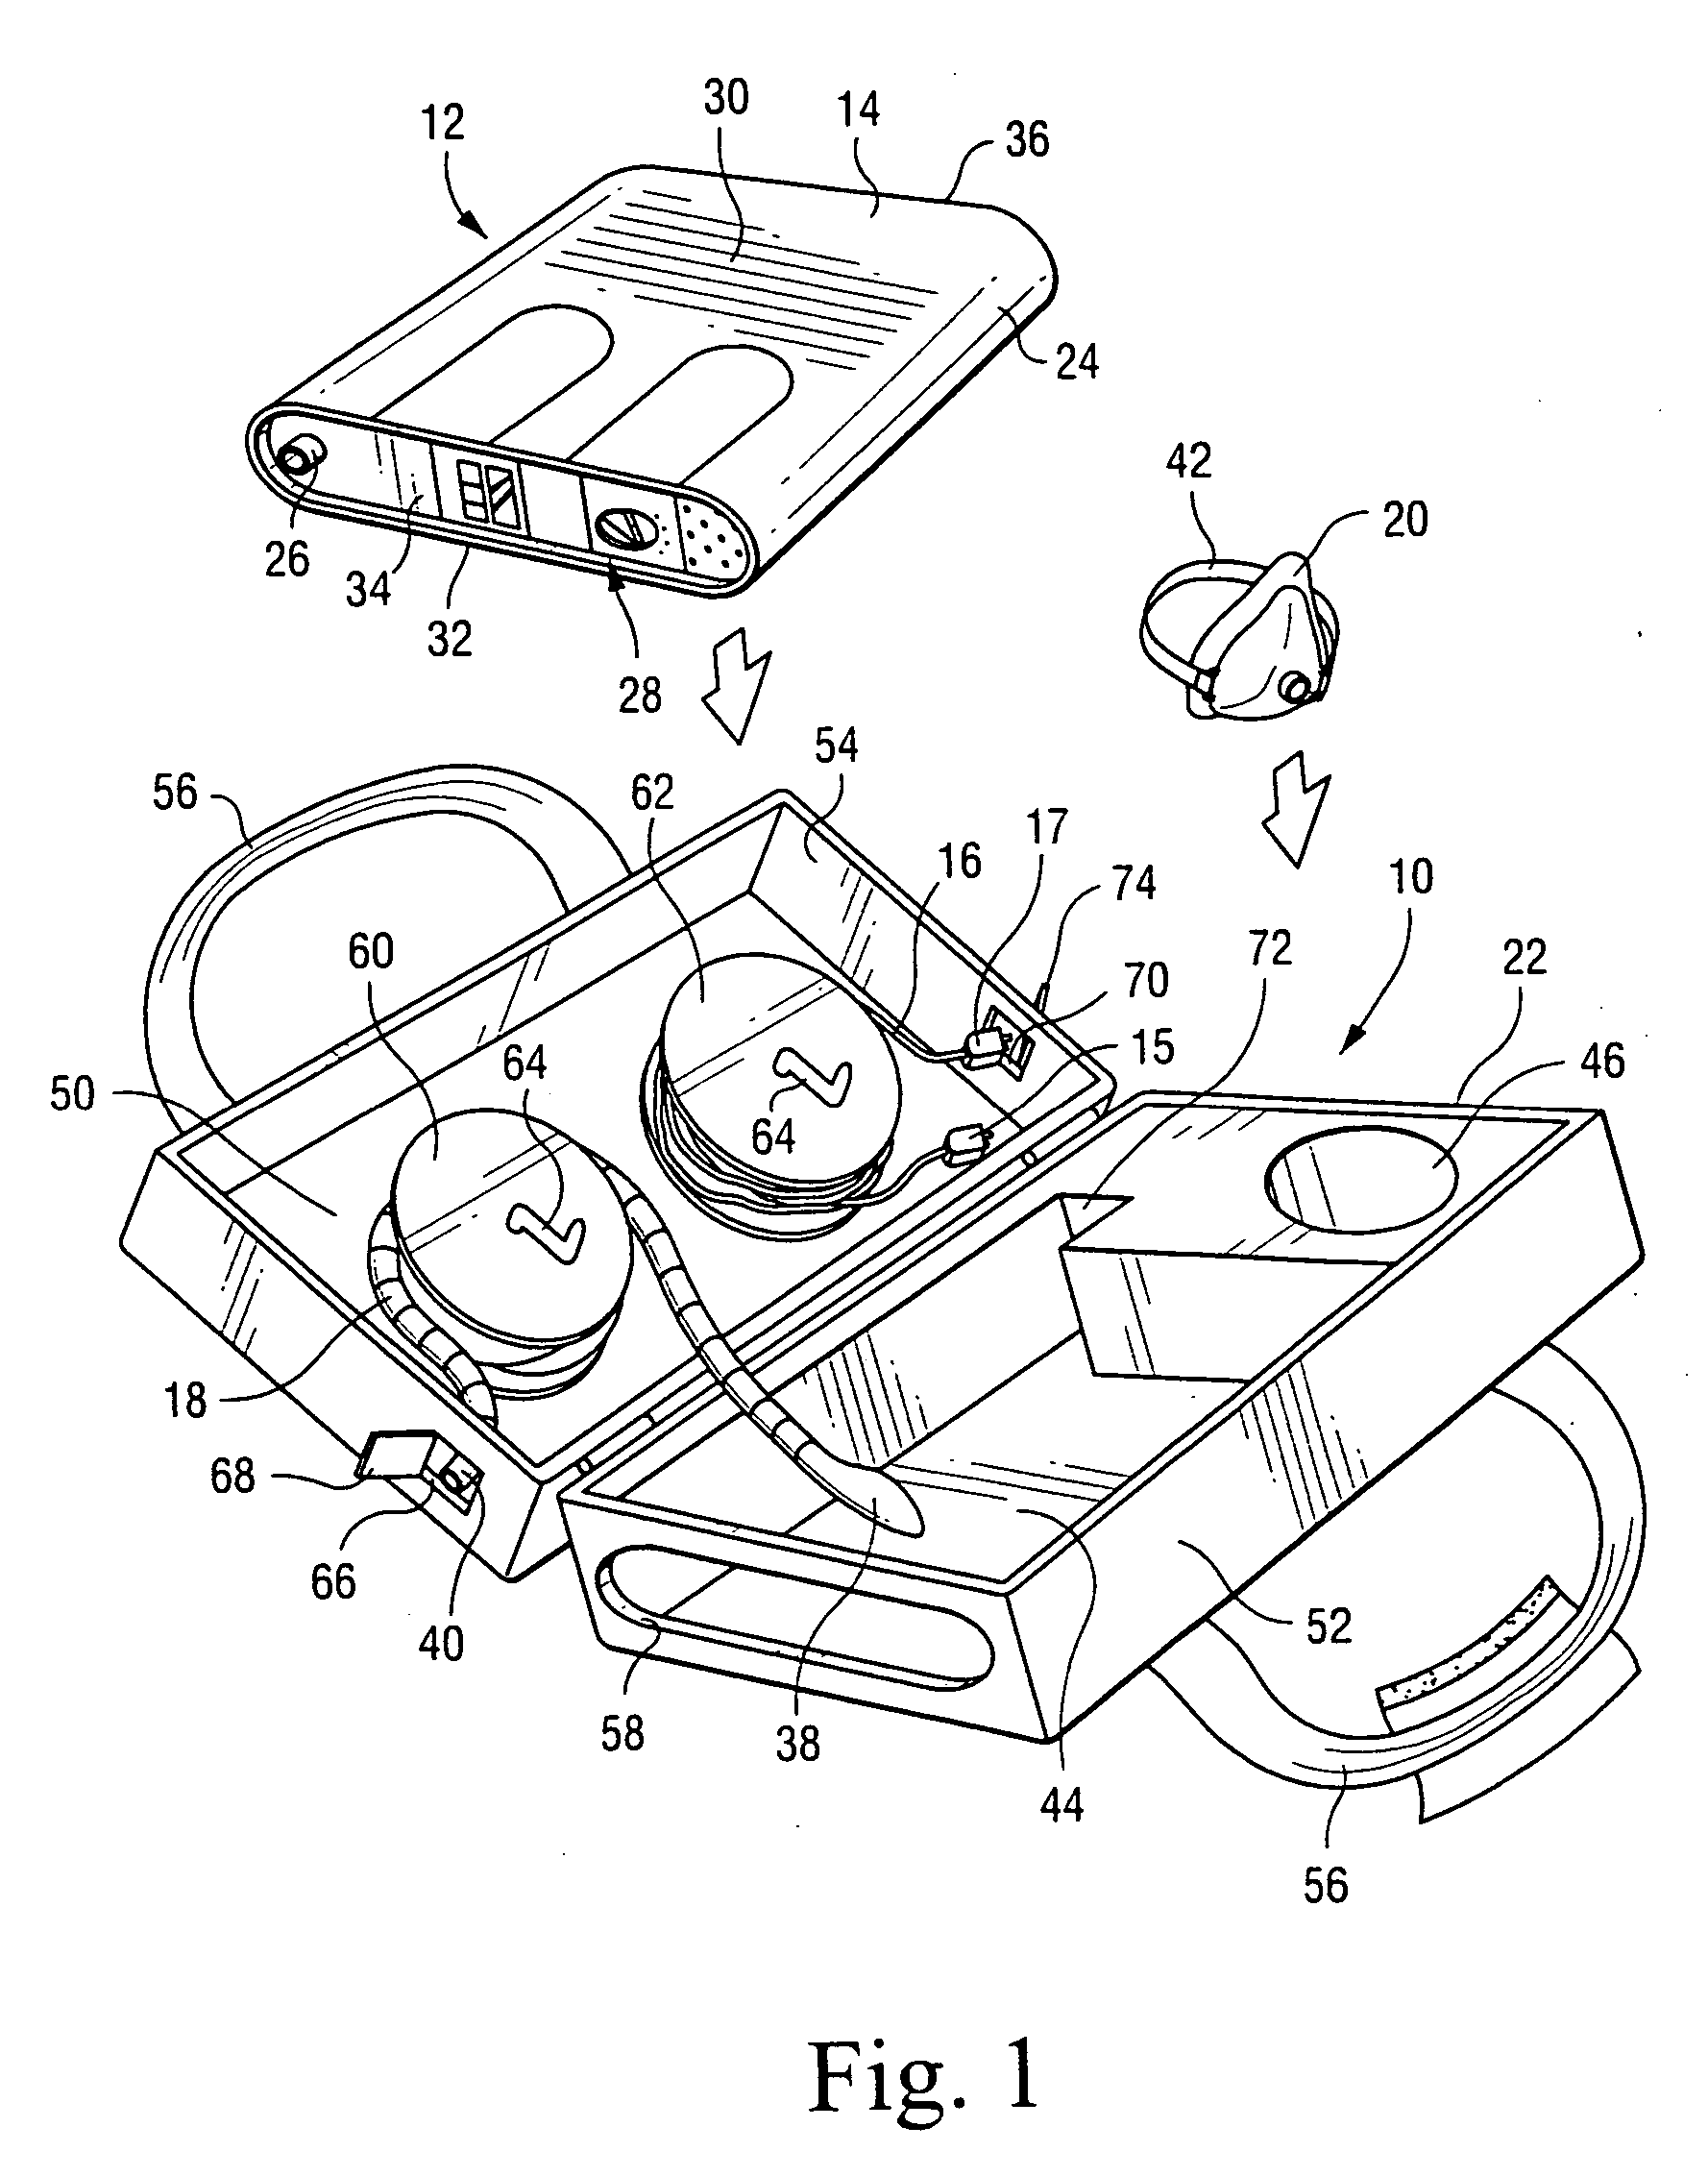 Storage system for an apparatus that delivers breathable gas to a patient